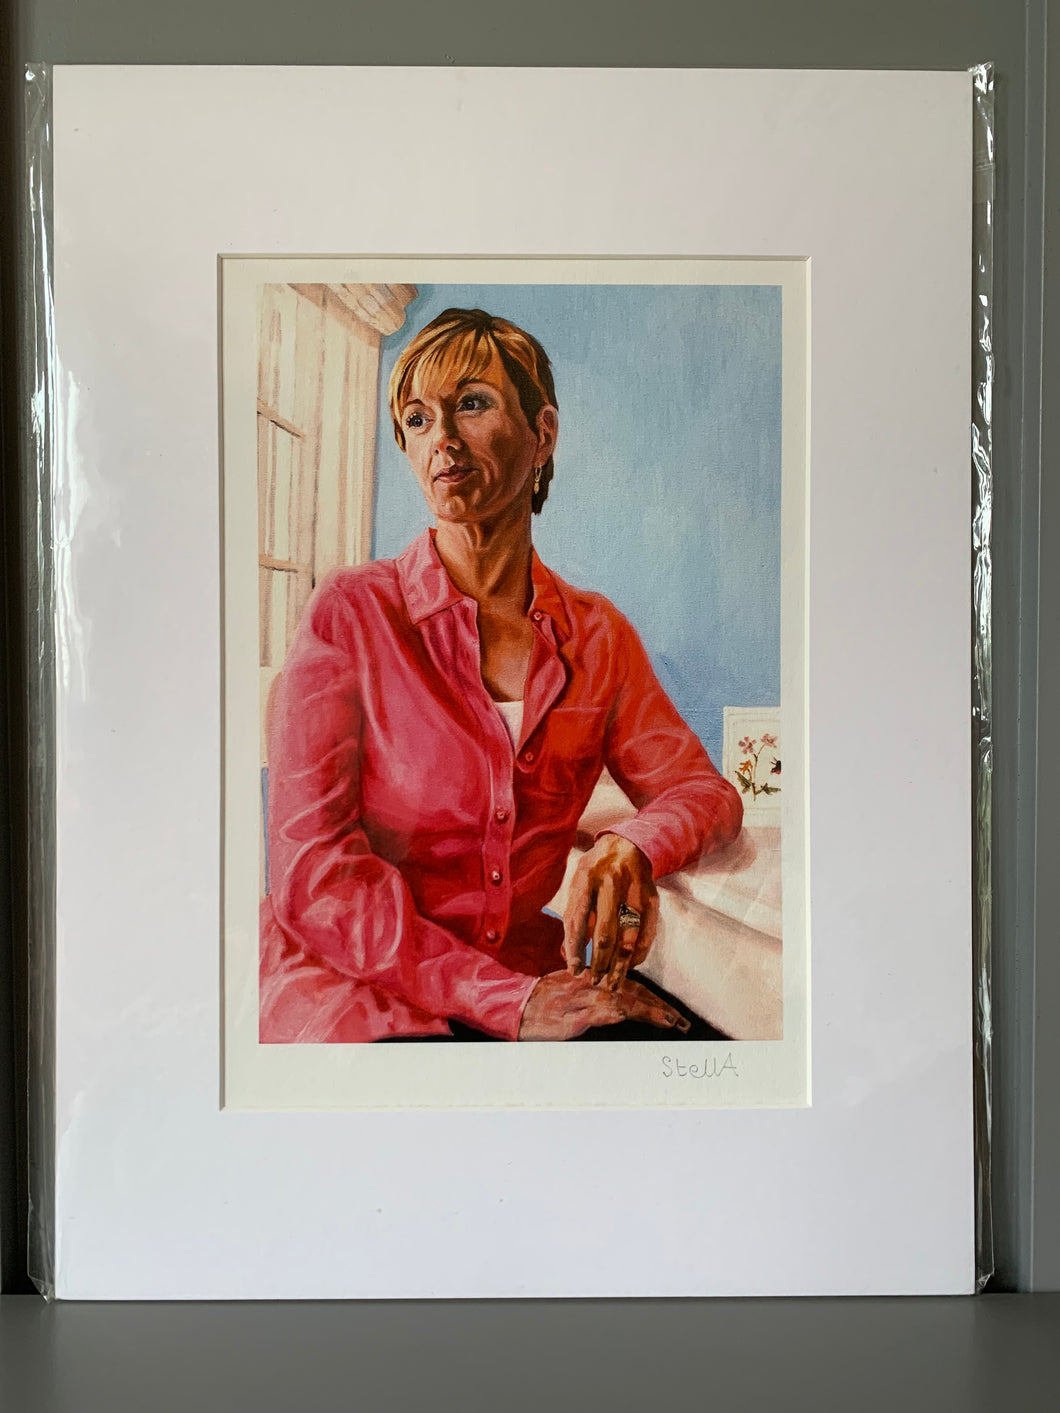 Fine art print reproduction of original oil painting of Julie Etchingham of ITV News at 10 by Stella Tooth portrait artist